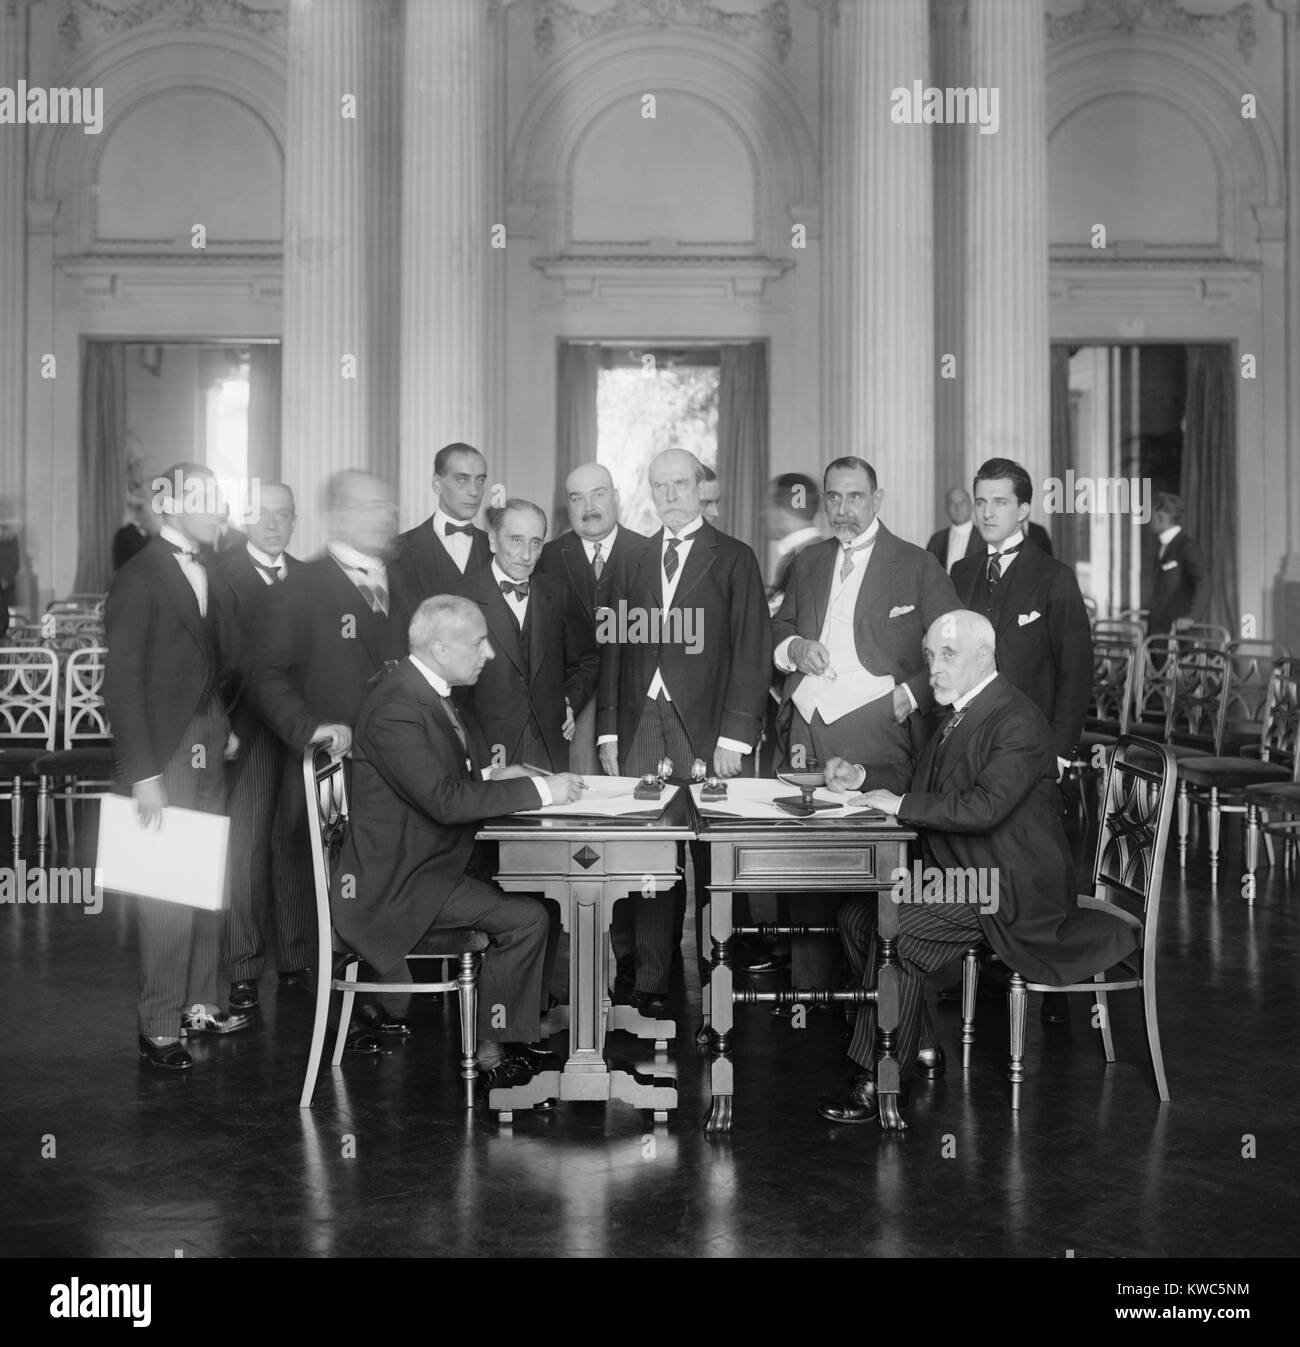 Charles Evans Hughes (center standing) presides at the closing of the Chile-Peruvian conference. July 21, 1922. The two countries were still disputing territory claims from the War of the Pacific (1877-83), which were finally settled in the Treaty of Lima in 1929. (BSLOC 2015 15 56) Stock Photo